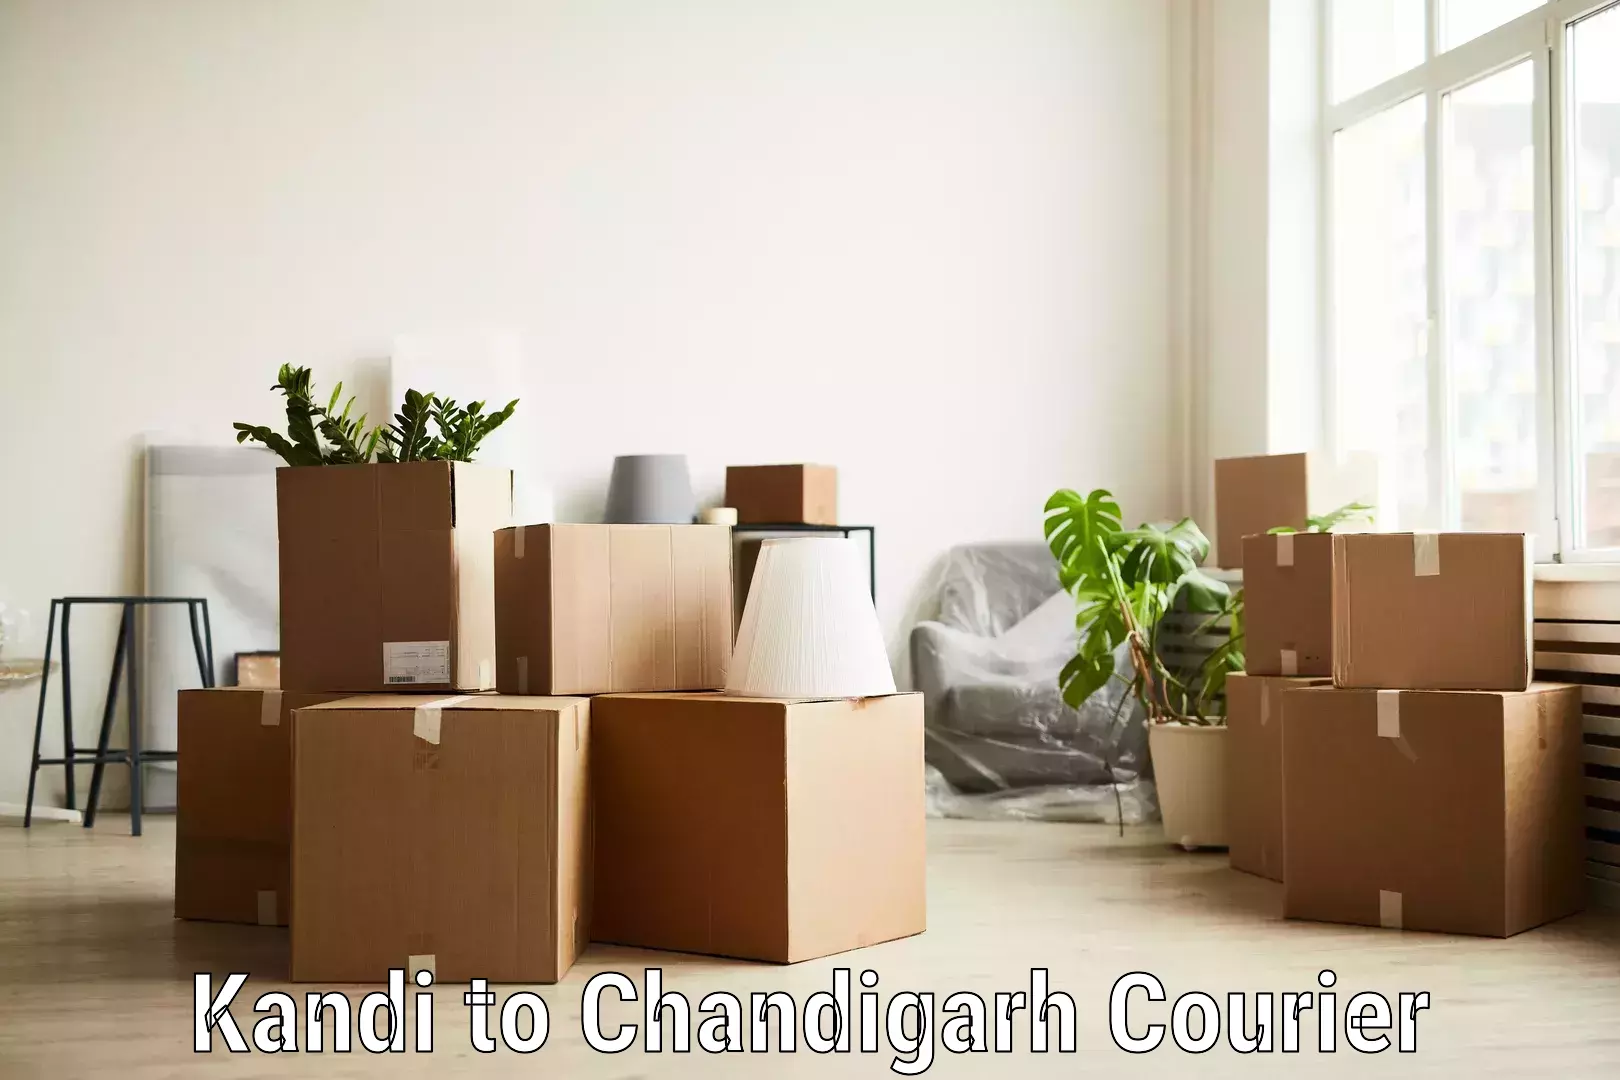 Large package courier Kandi to Chandigarh